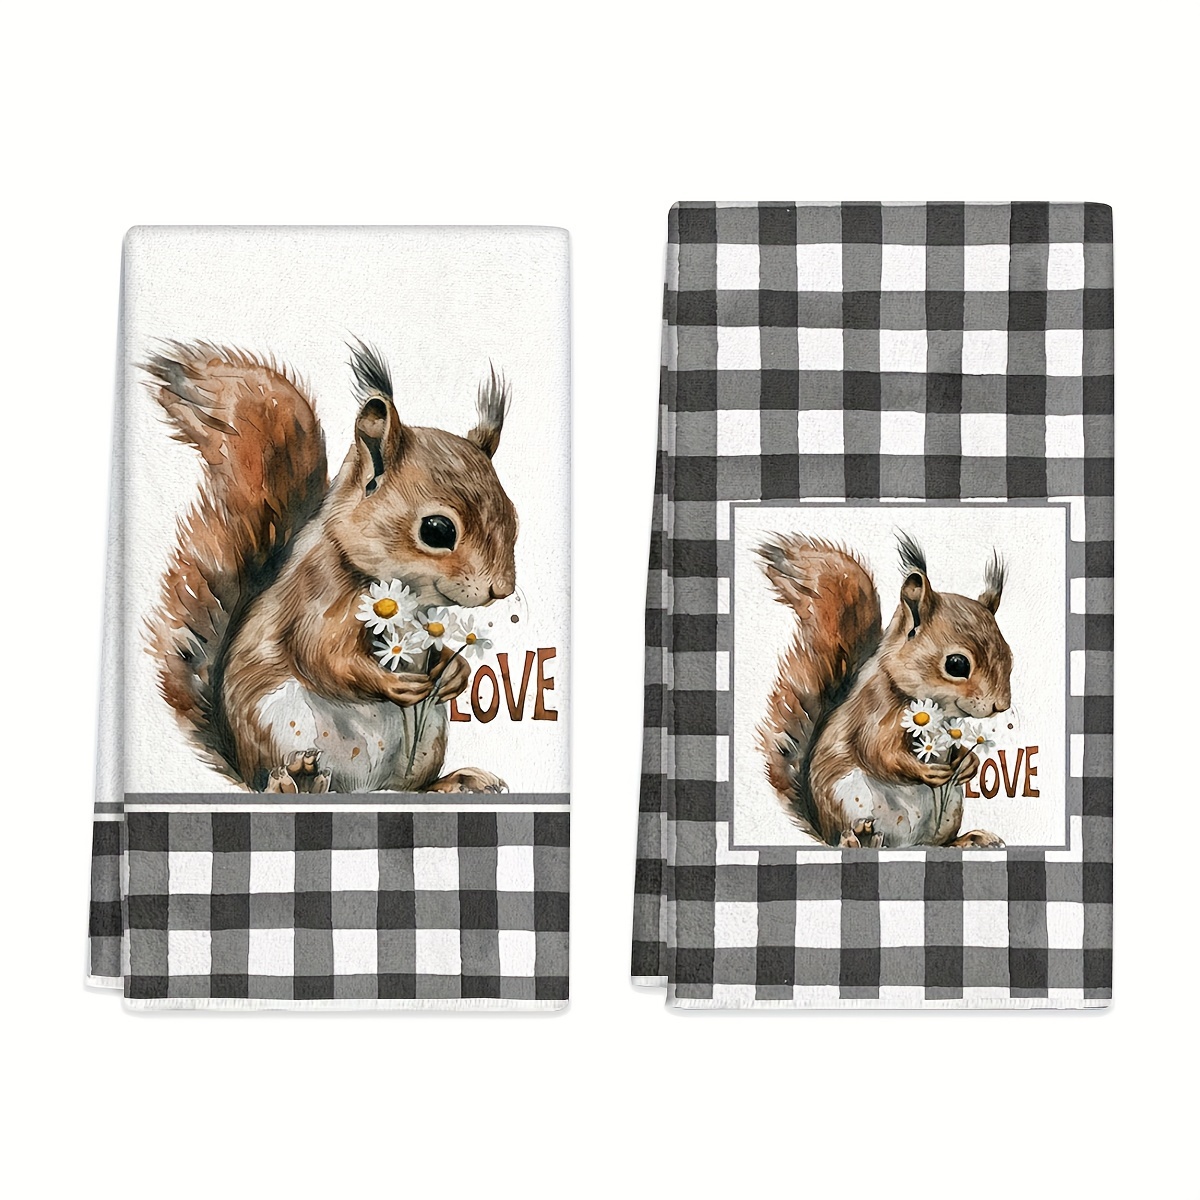 

2pcs, Hand Towel, Squirrel Kitchen Decorative Dish Towels, Absorbent Cloth Tea Towels For Cooking, Baking And Cleaning, Housewarming Gifts, Cleaning Supplies, Bathroom Supplies